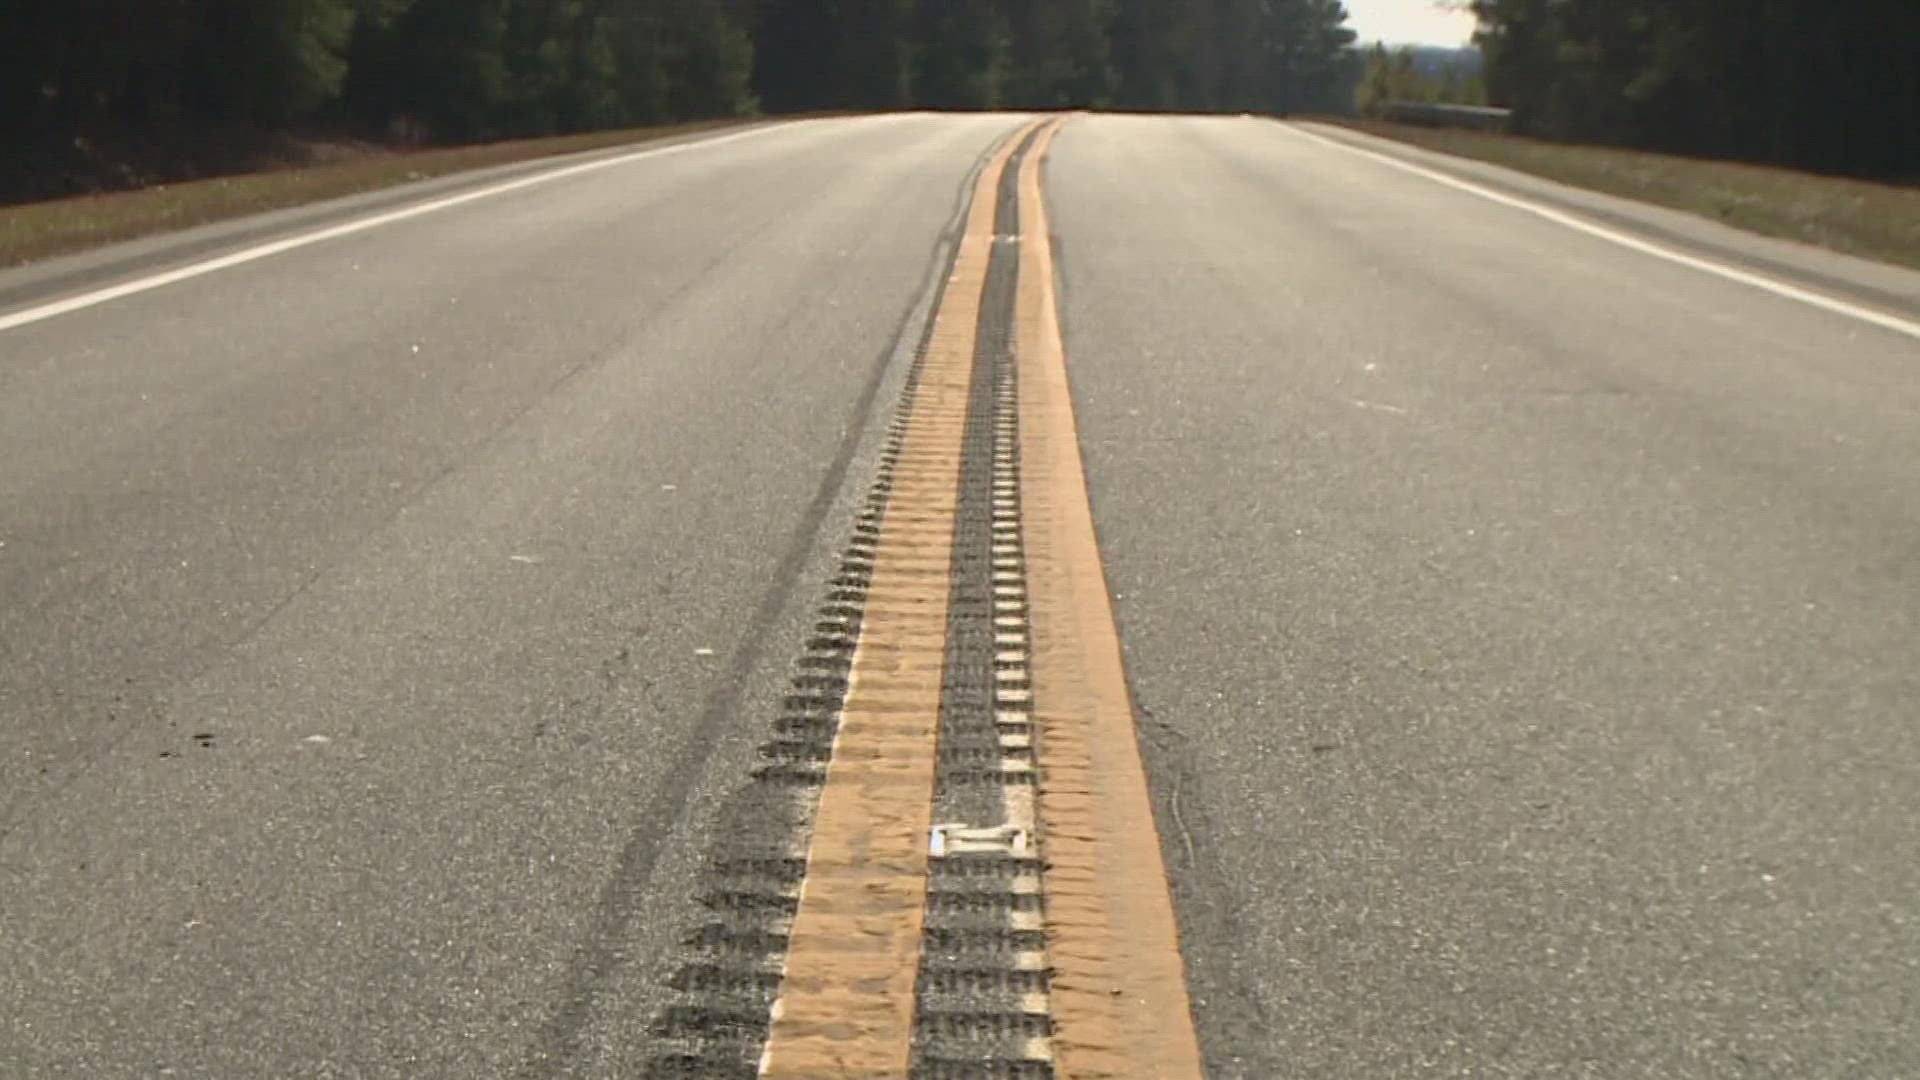 First responders are often called to crashes on NC-109. NCDOT says they added rumble strips along the stretch.